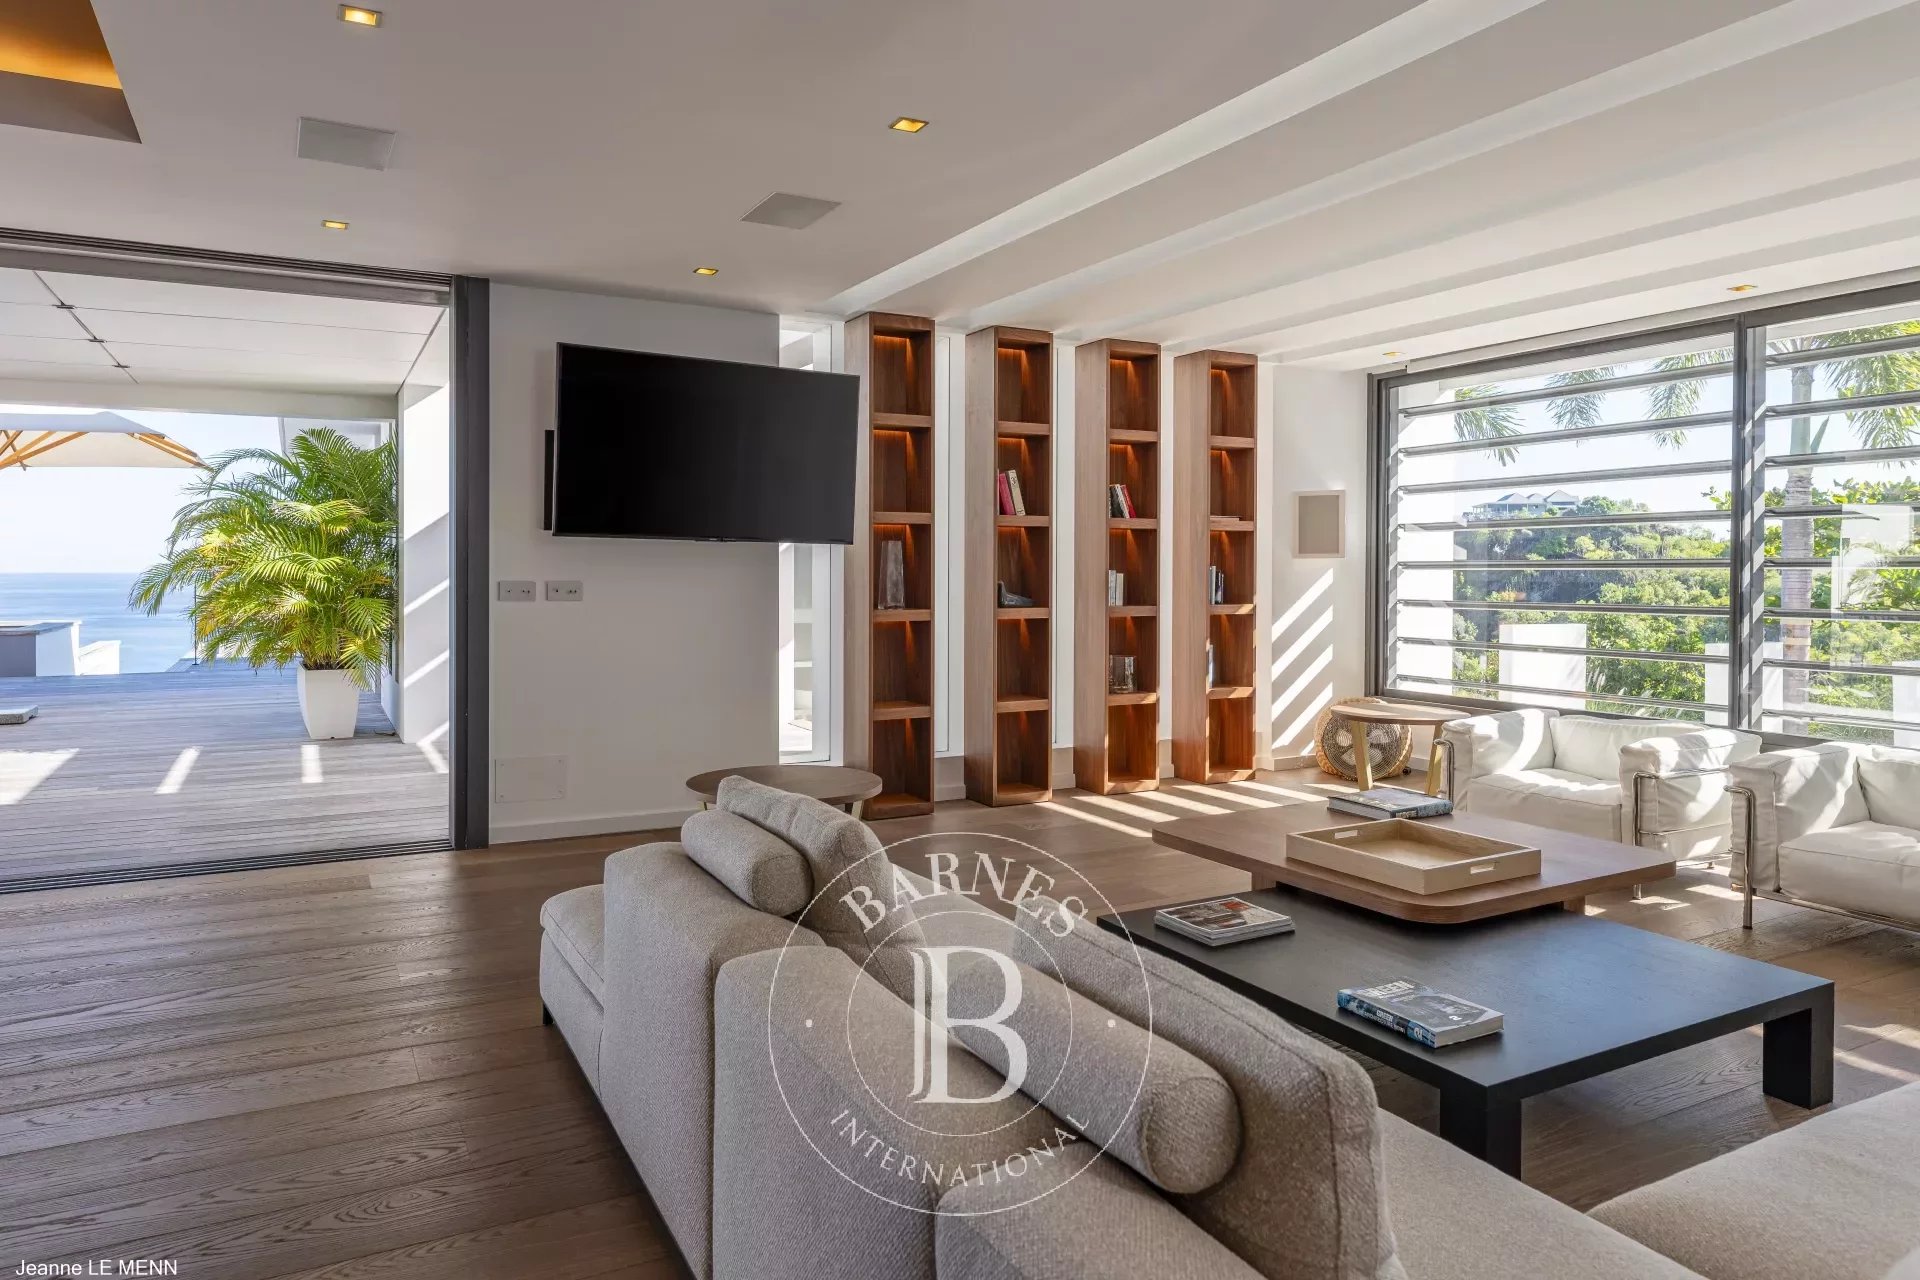 5-Bedroom Villa in St.Barths - picture 10 title=